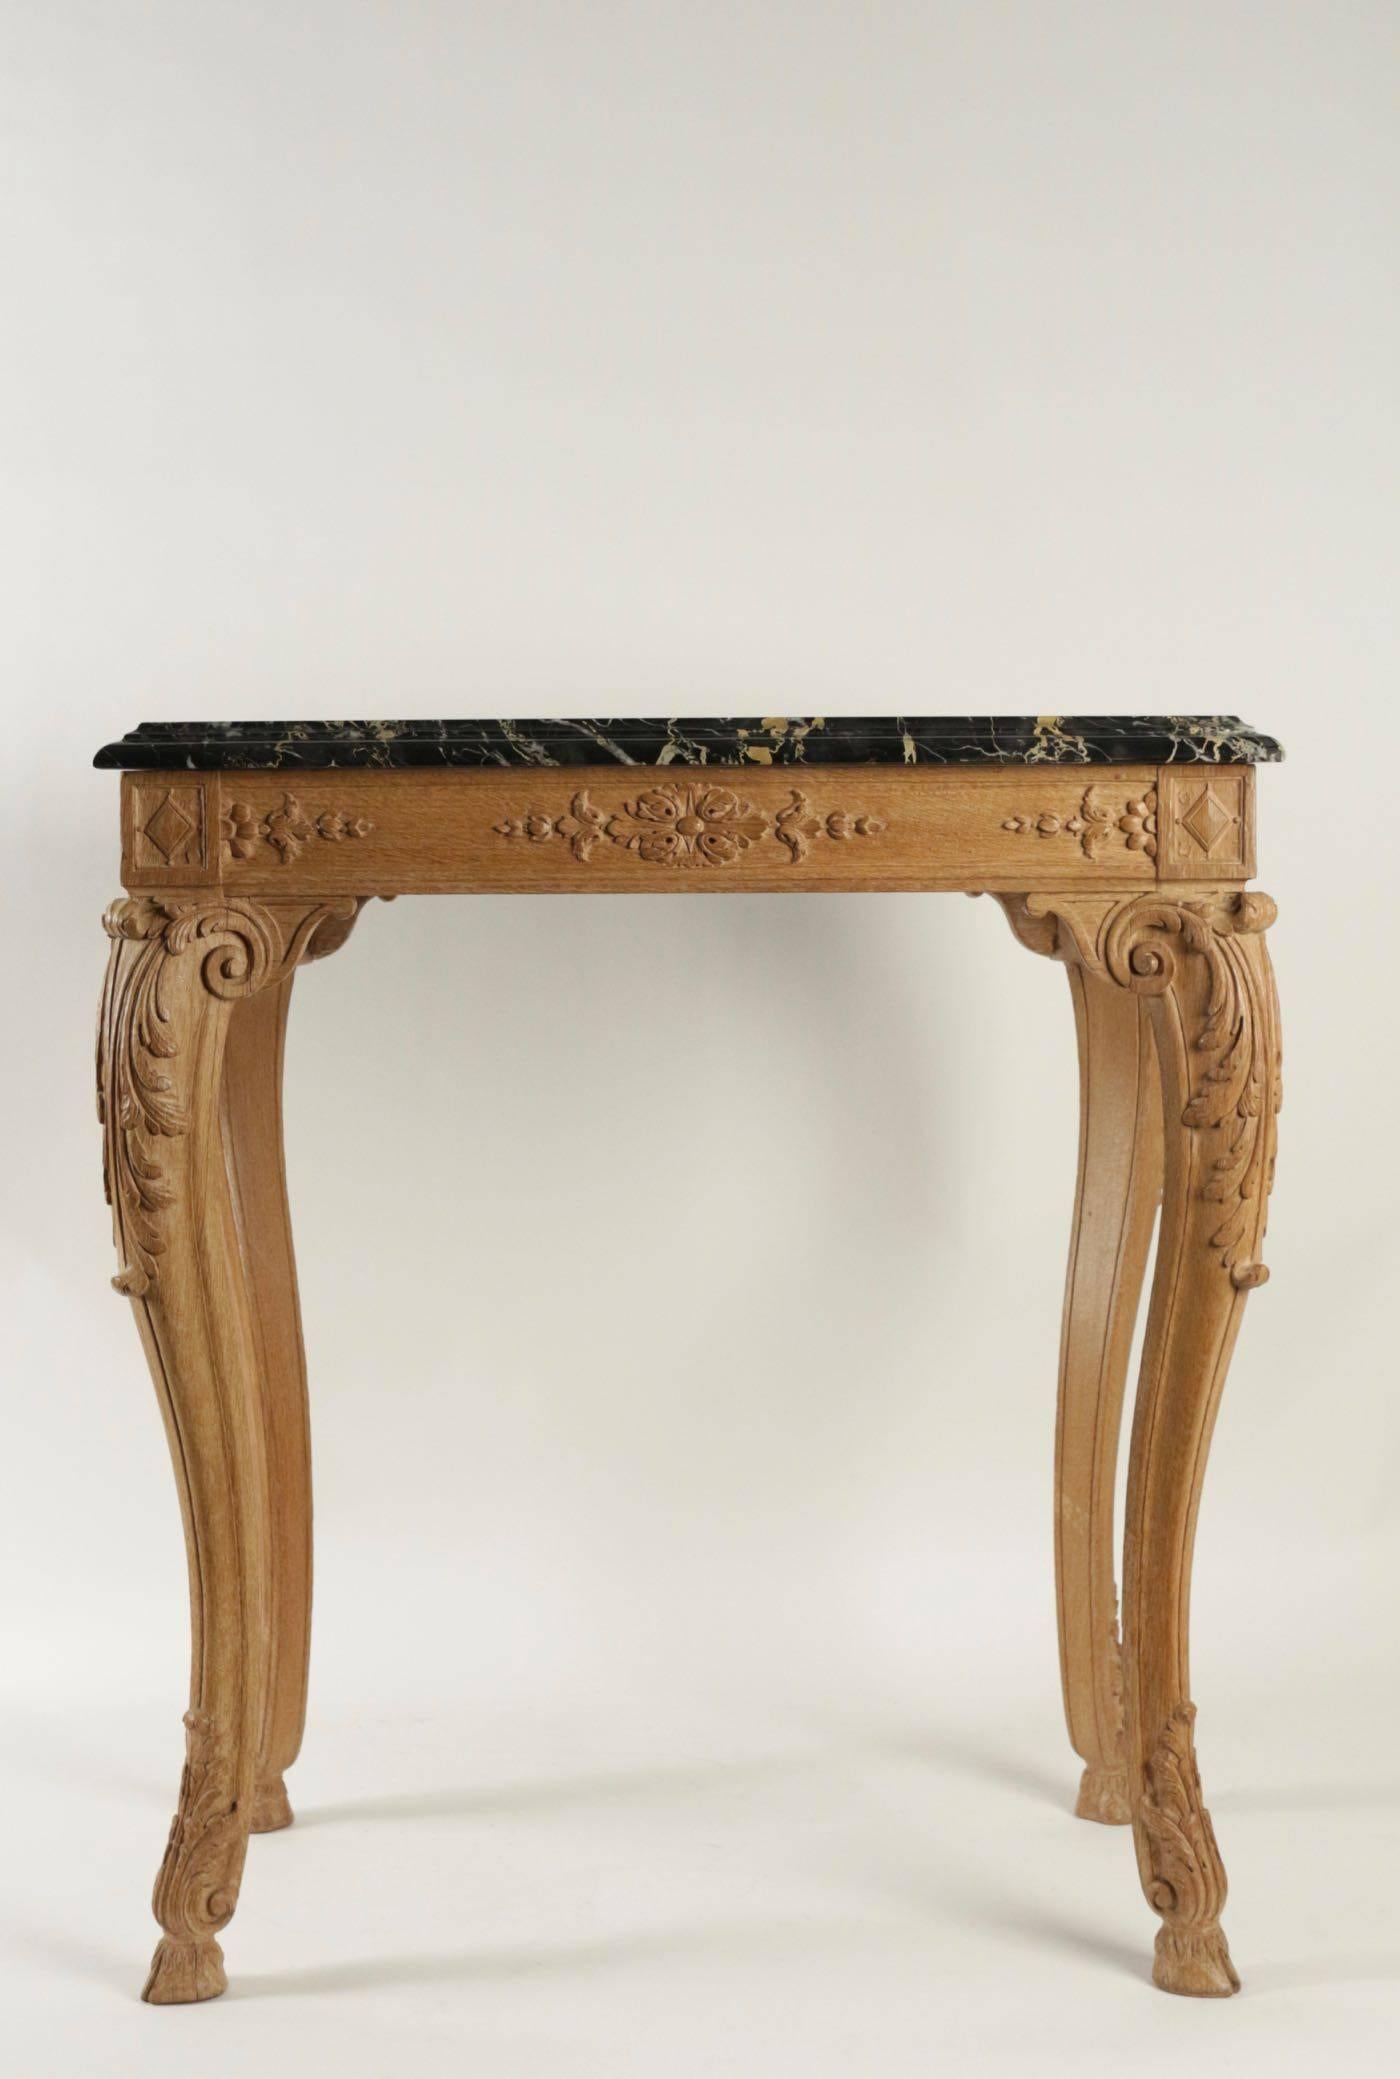 Oak hand-carved gueridon table in the style of Louis XV, marble-top, 20th century.
   